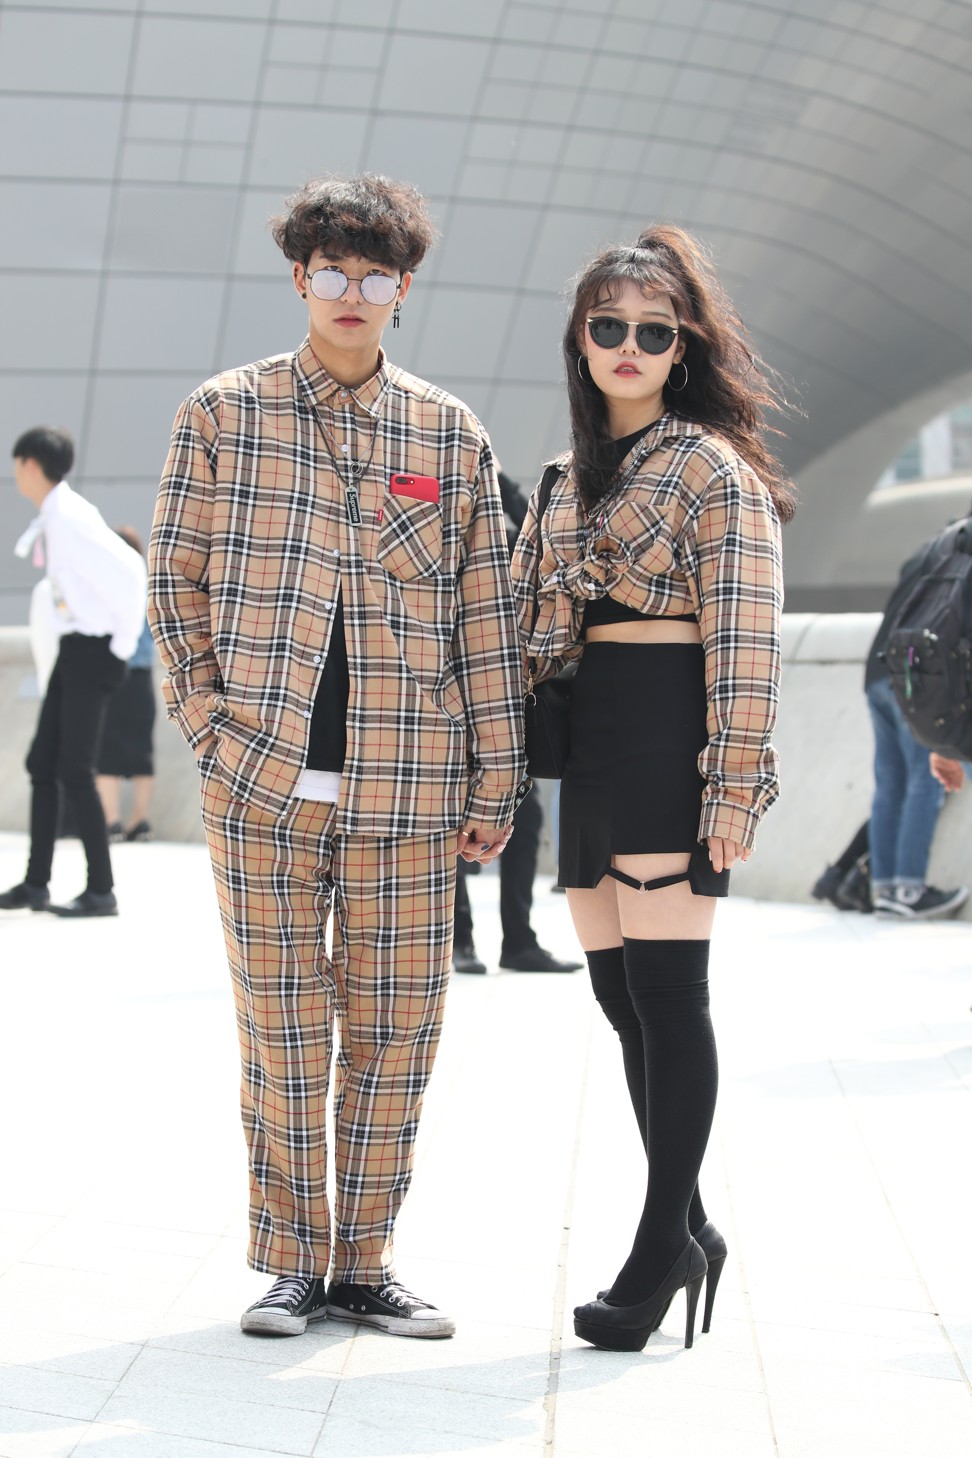 Seoul Fashion Week: nine of the coolest looks from South Korea | South ...